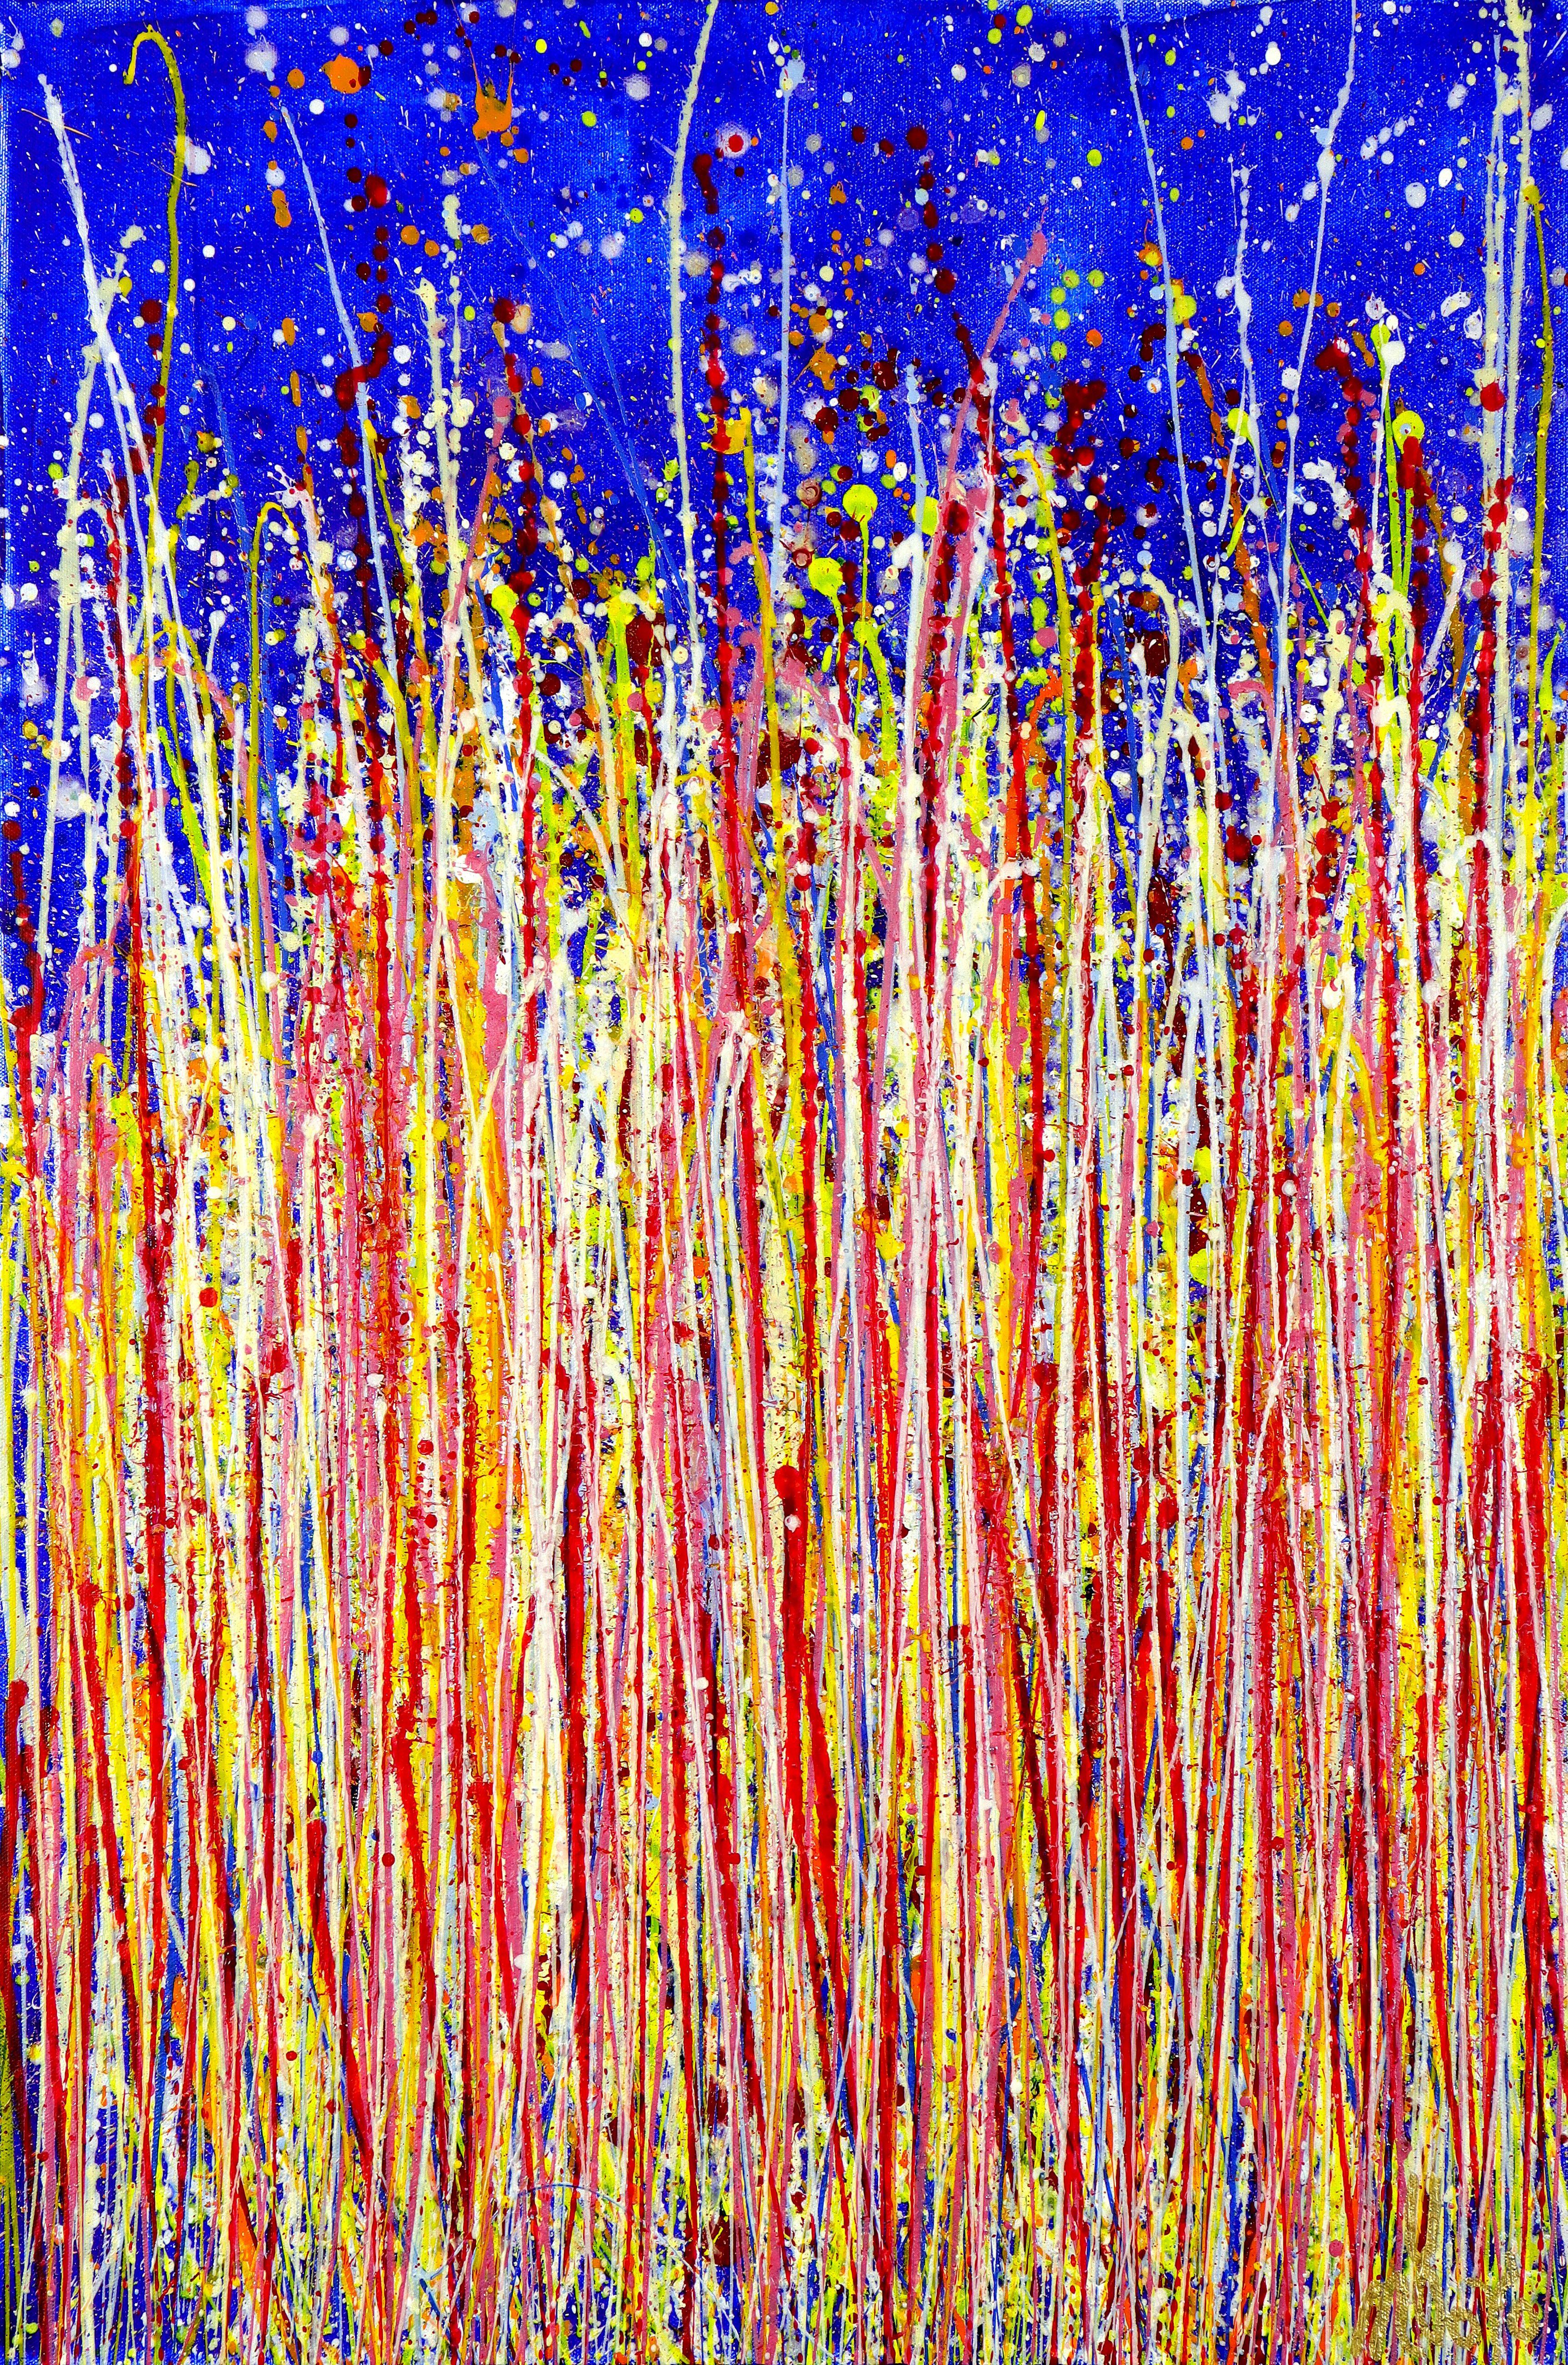 xpressive modern abstract, bold full of life, gloss and shimmer! Inspired by nature. This expressive work is done in Nestorâ€™s unique gestural style in which paint is literally hand tossed onto the canvas with precision resulting in a beautiful,